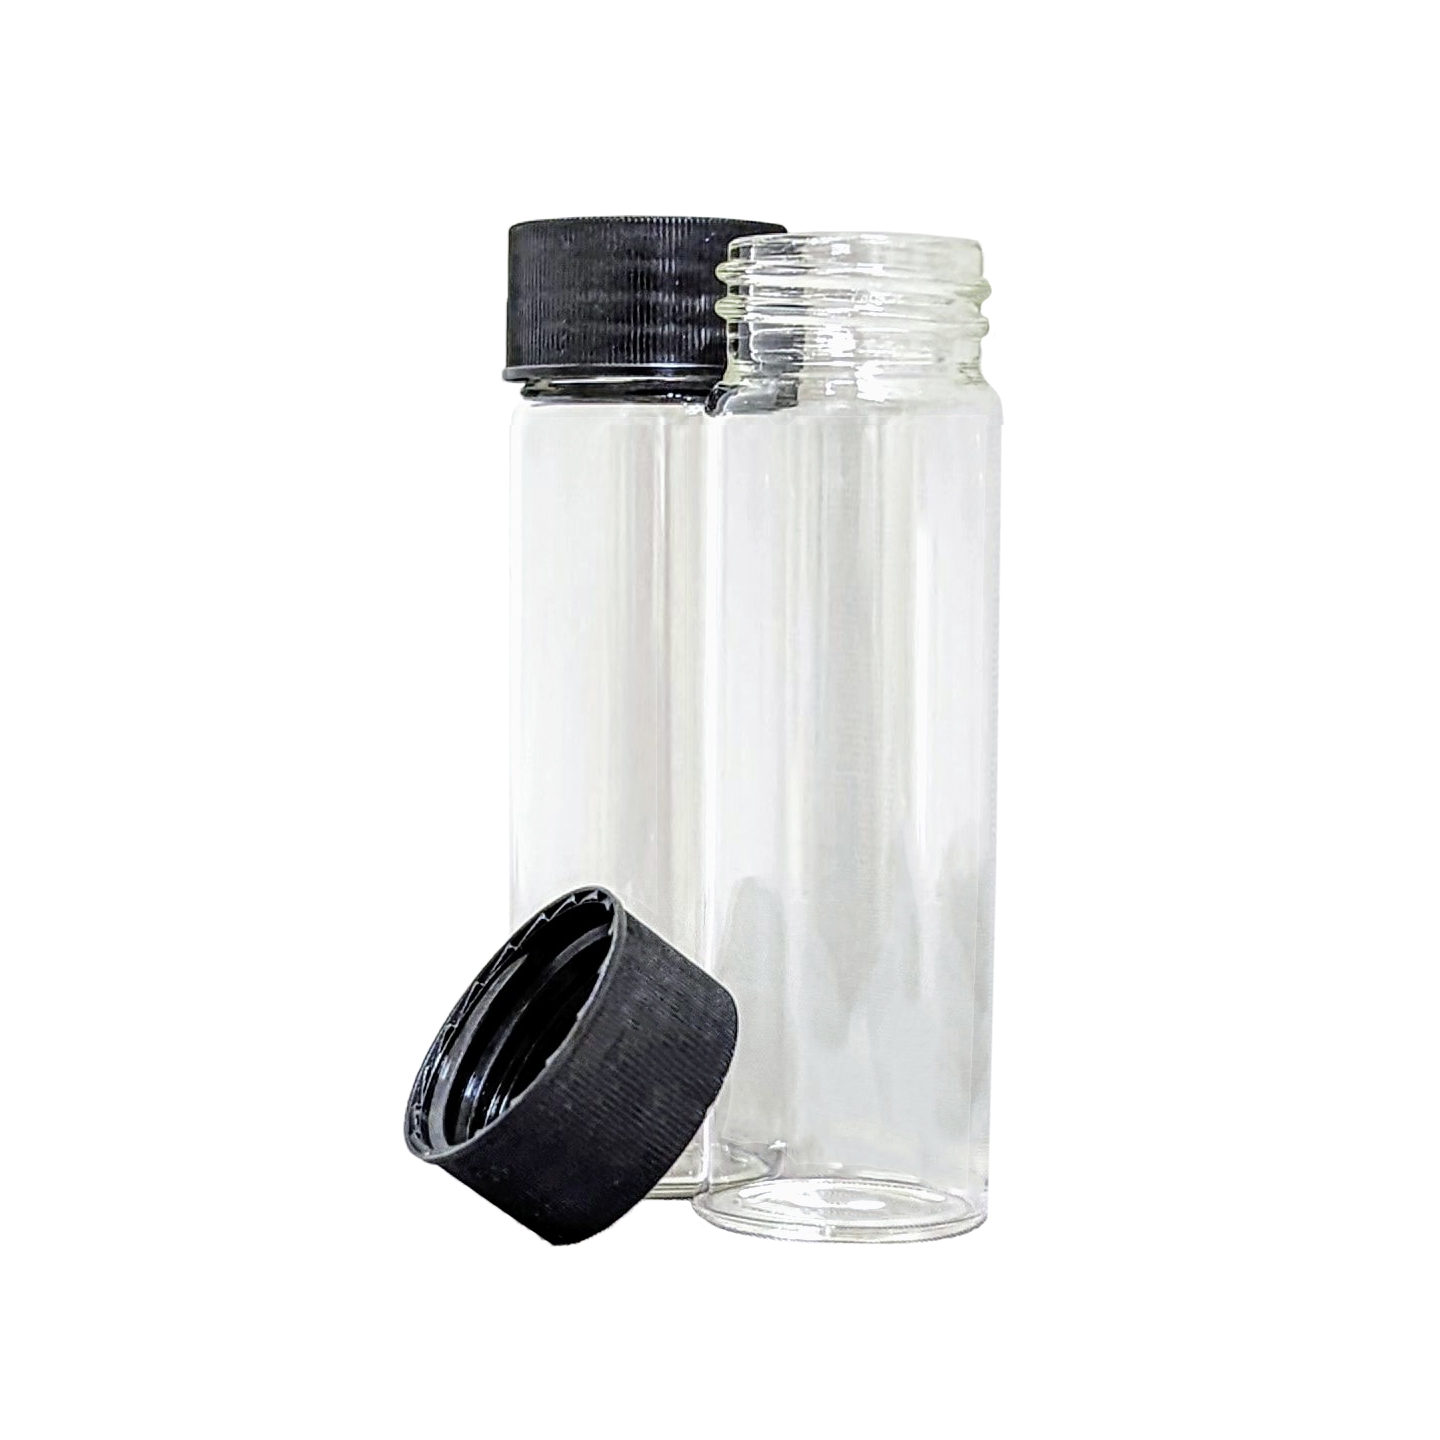 Vial, Screw Neck Vials, Tall Form, Capacity 7ml, With Unattached Polypropylene Closure